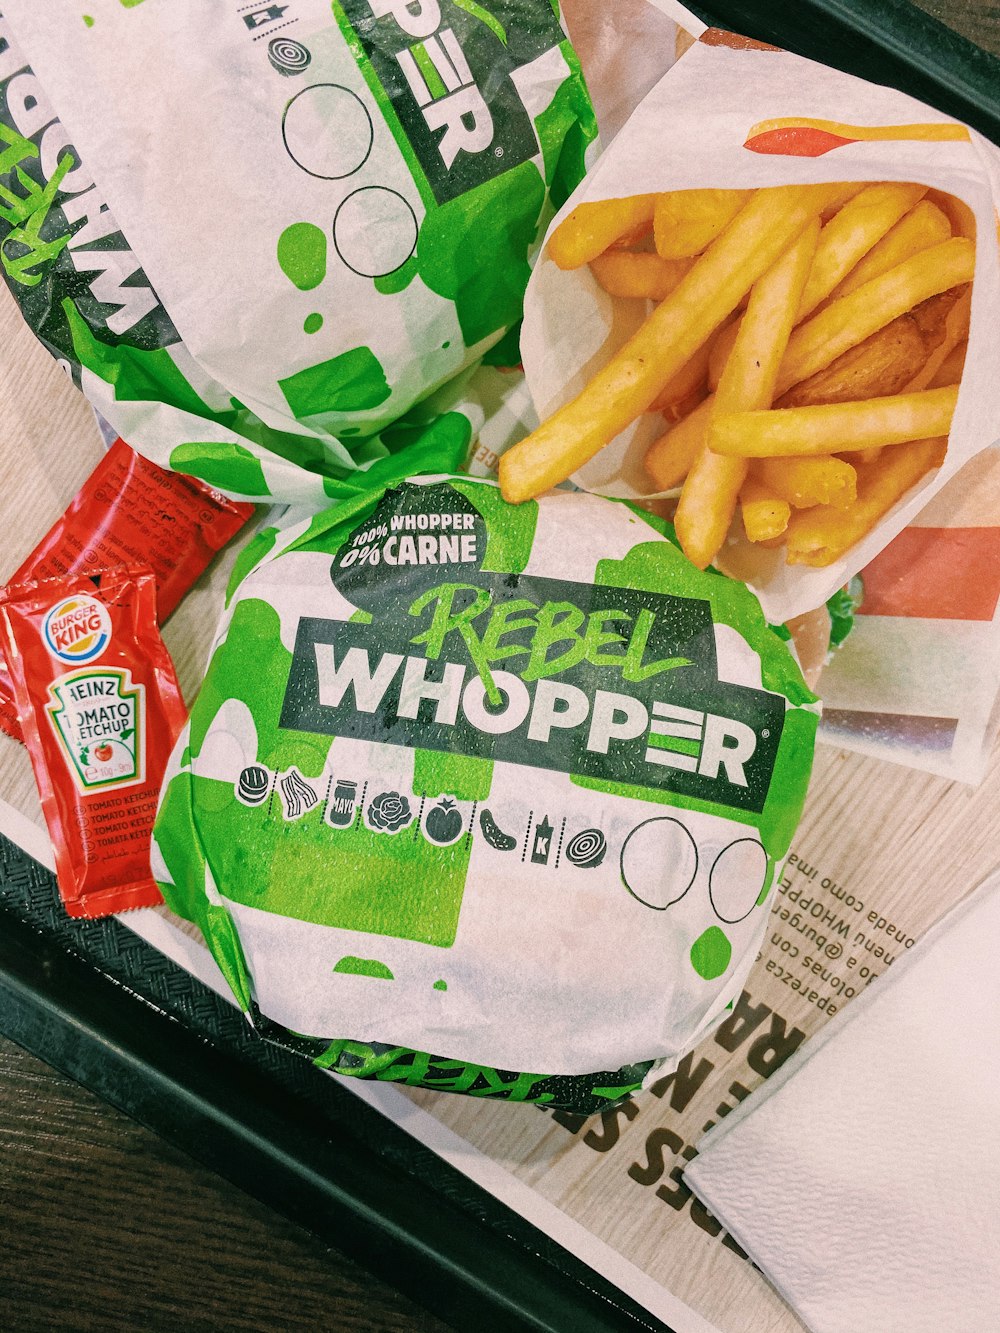 rebel whopper burger and ries